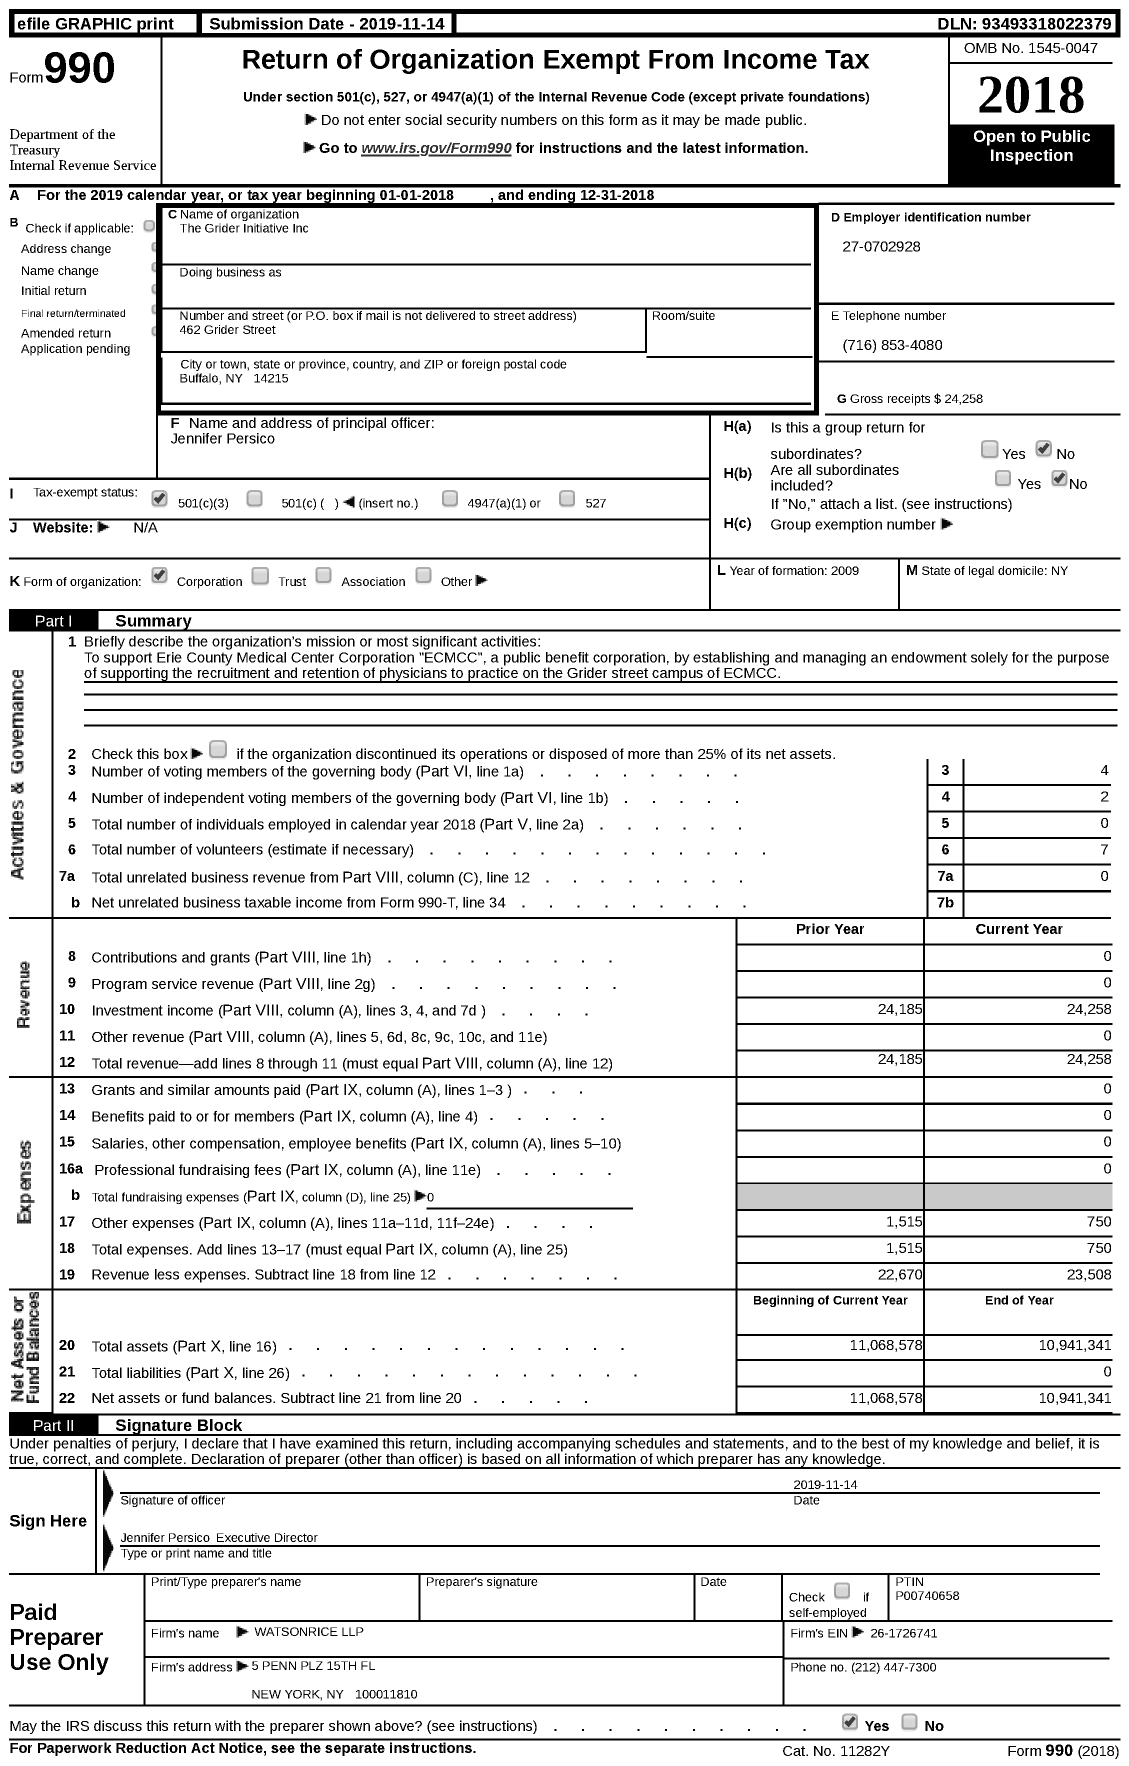 Image of first page of 2018 Form 990 for The Grider Initiative